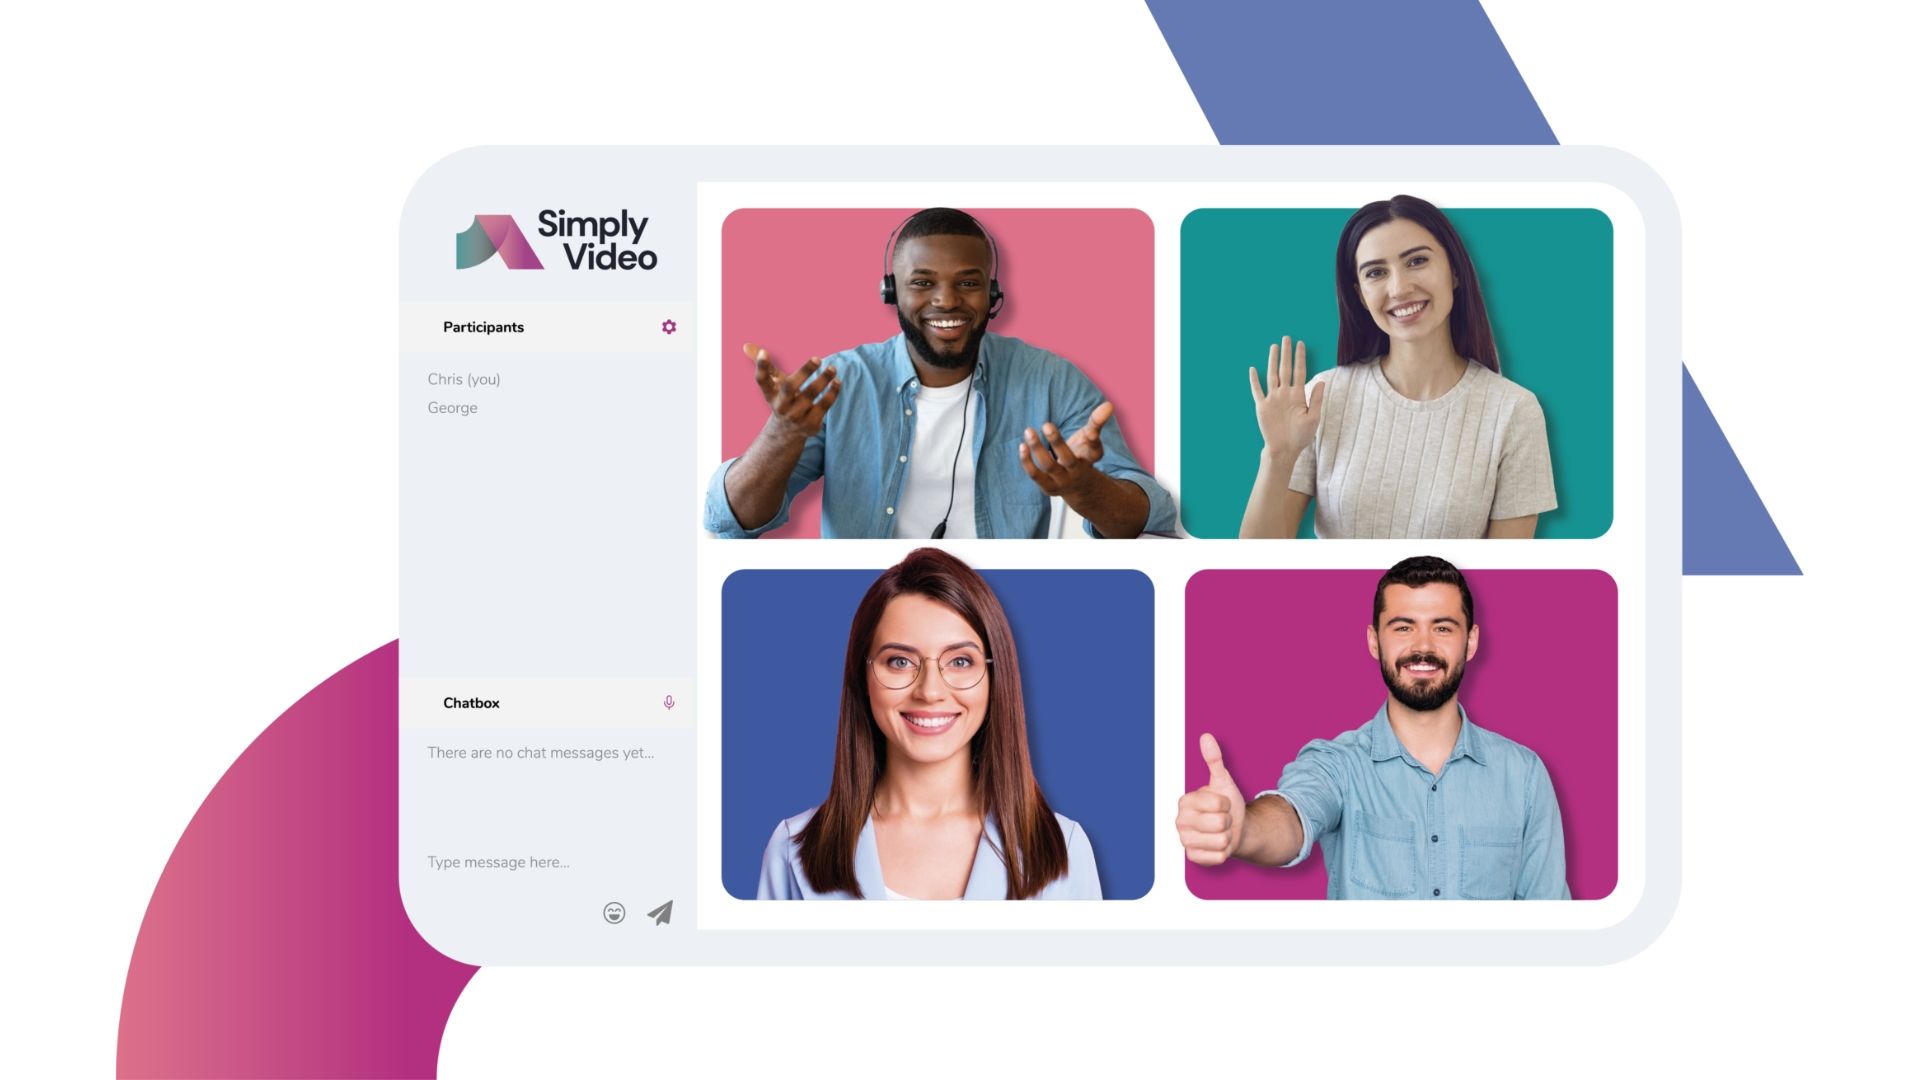 SimplyVideo is an XR-enhanced remote collaboration tool. It offers video calls that can be joined from any device or location. Learn more in our guide.